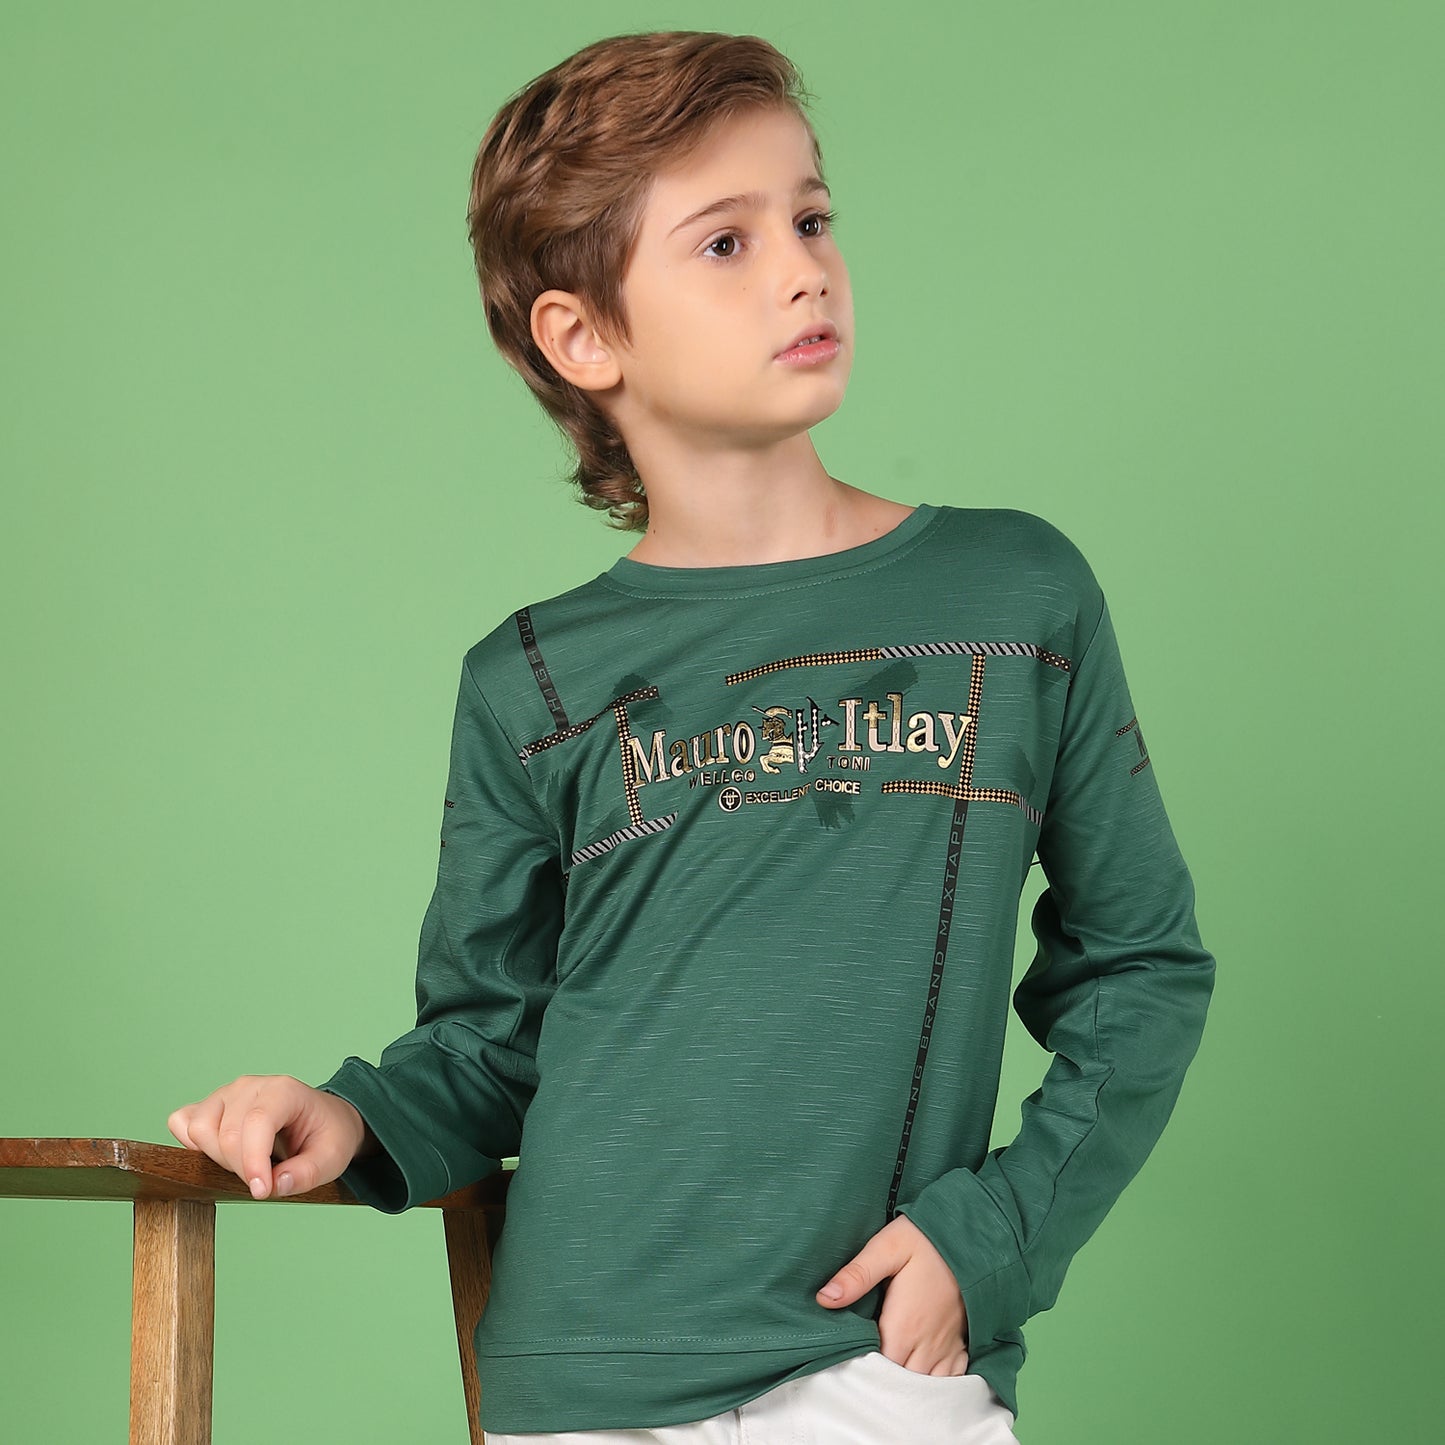 Stylish Full-Sleeves T-shirt for Young boys